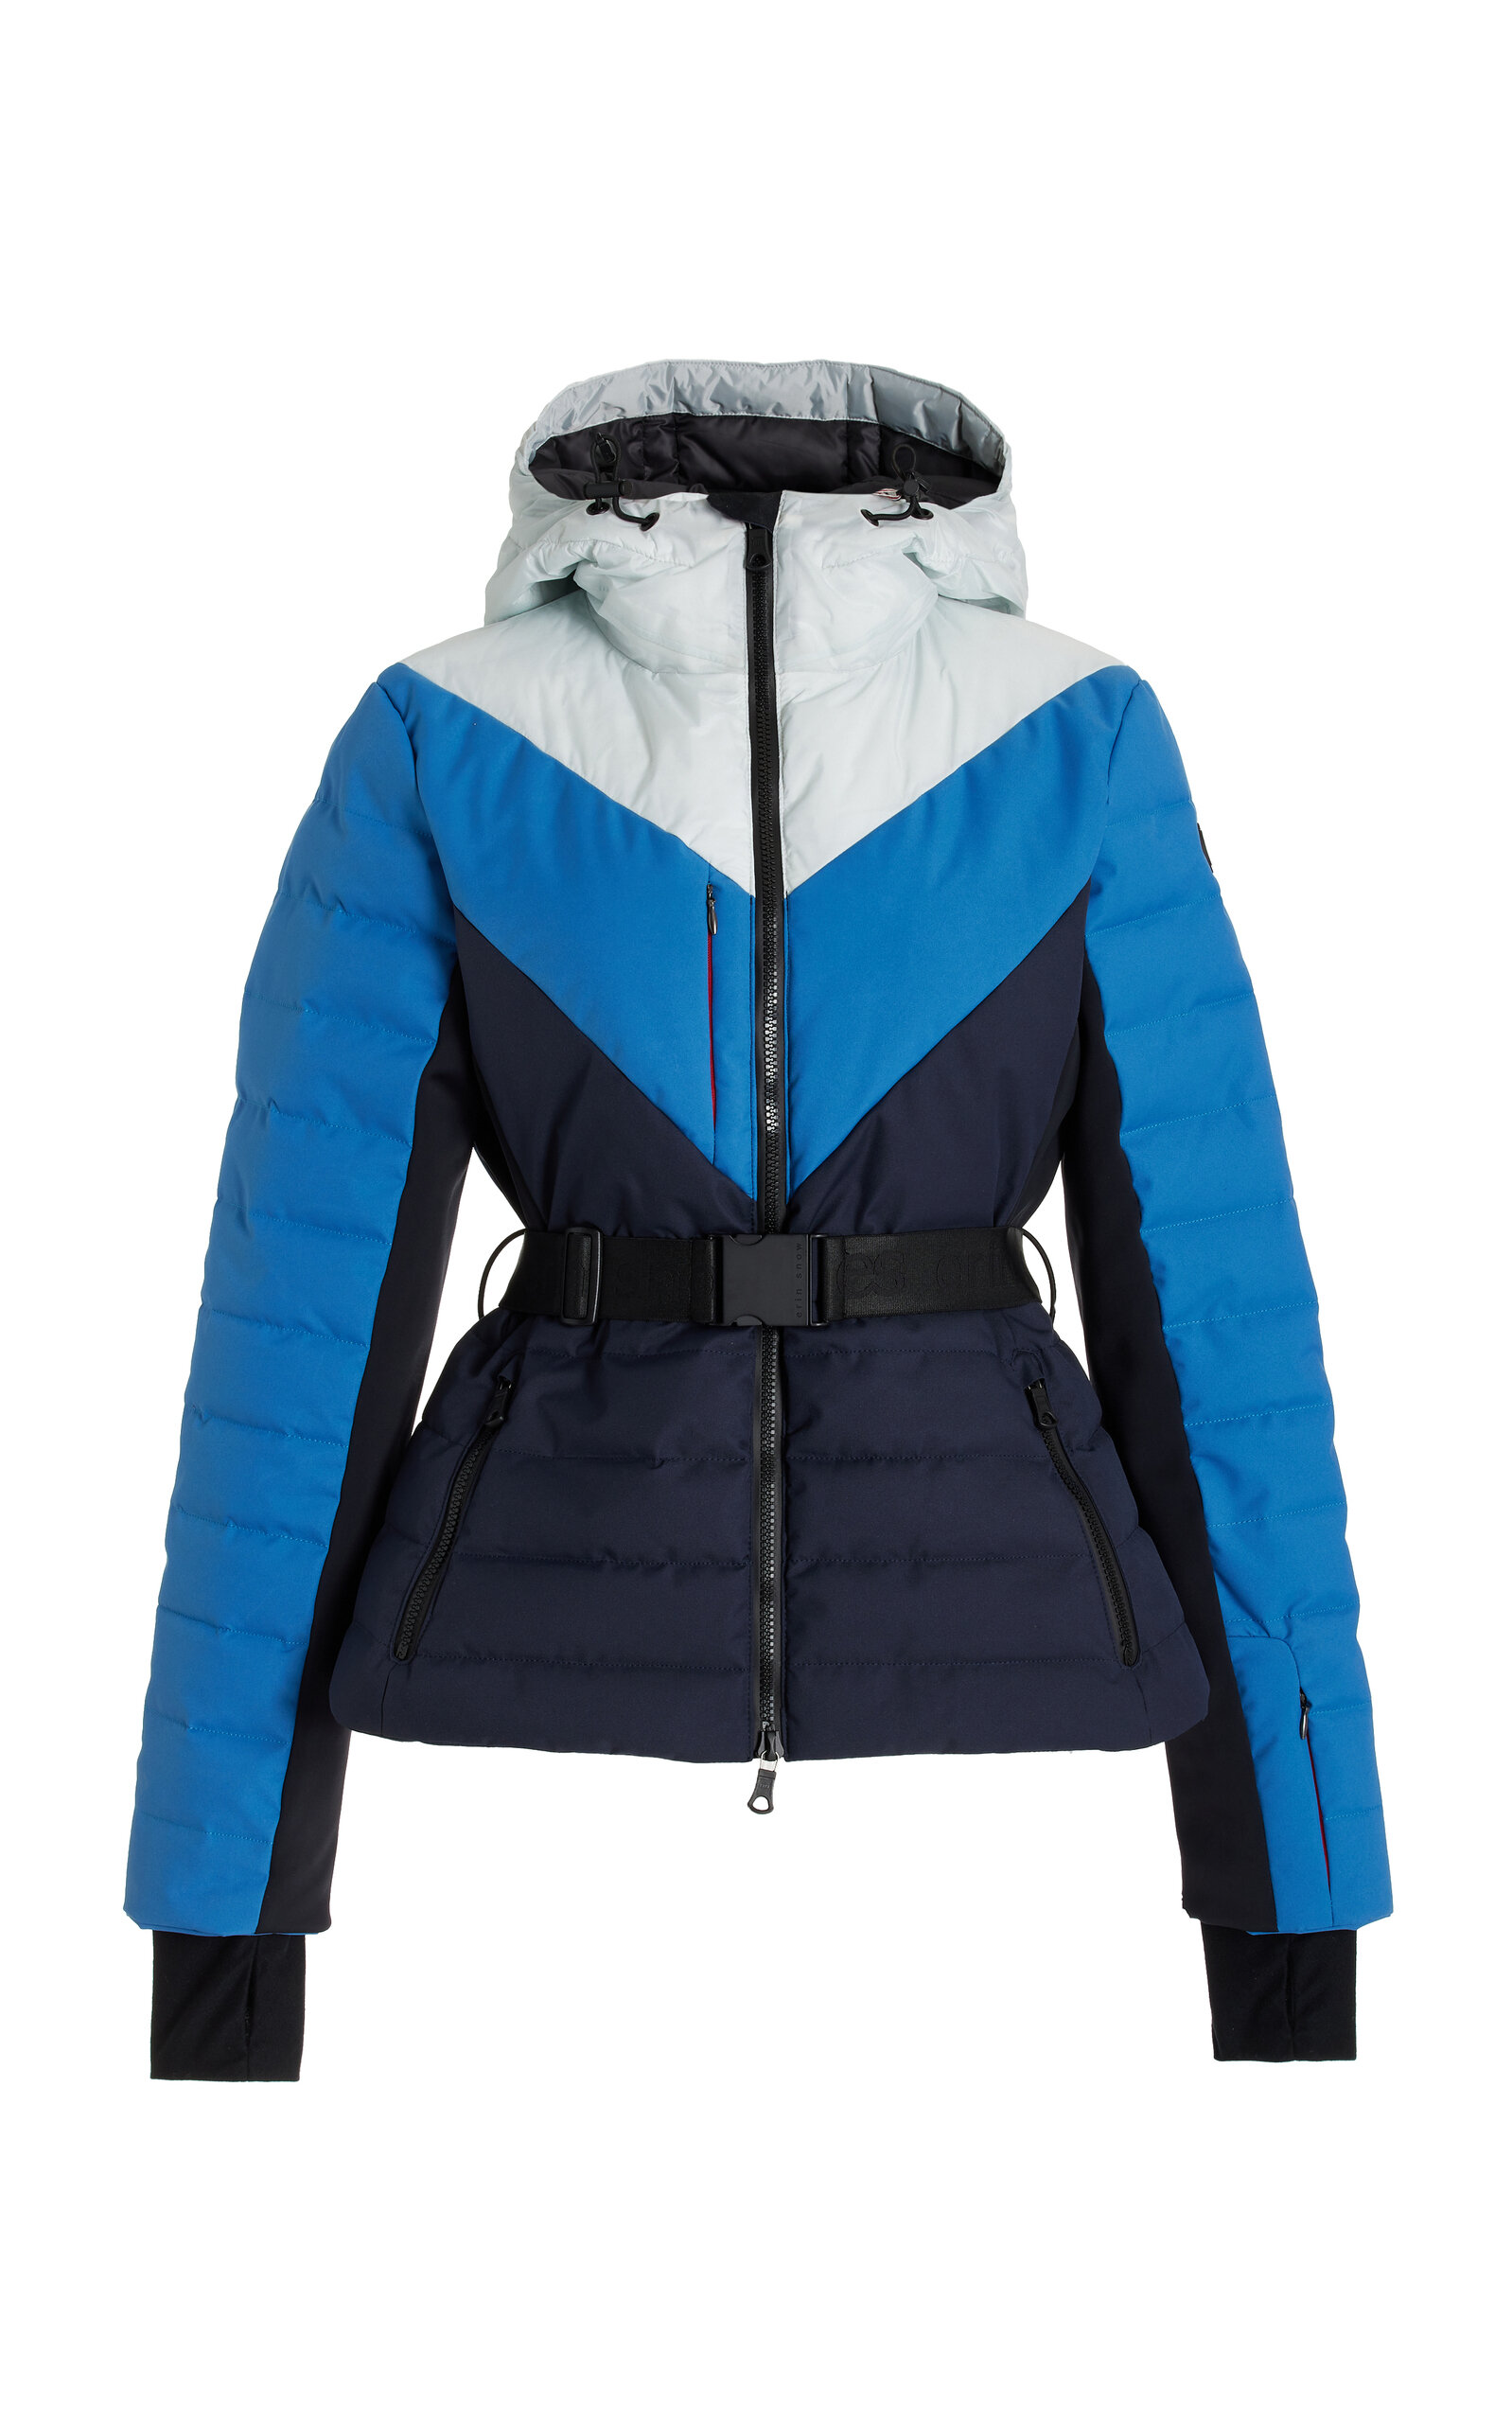 https://www.modaoperandi.com/assets/images/products/949196/587429/large_erin-snow-blue-kat-chevron-jacket-in-eco-sporty-with-cire.jpg?_t=1686240003